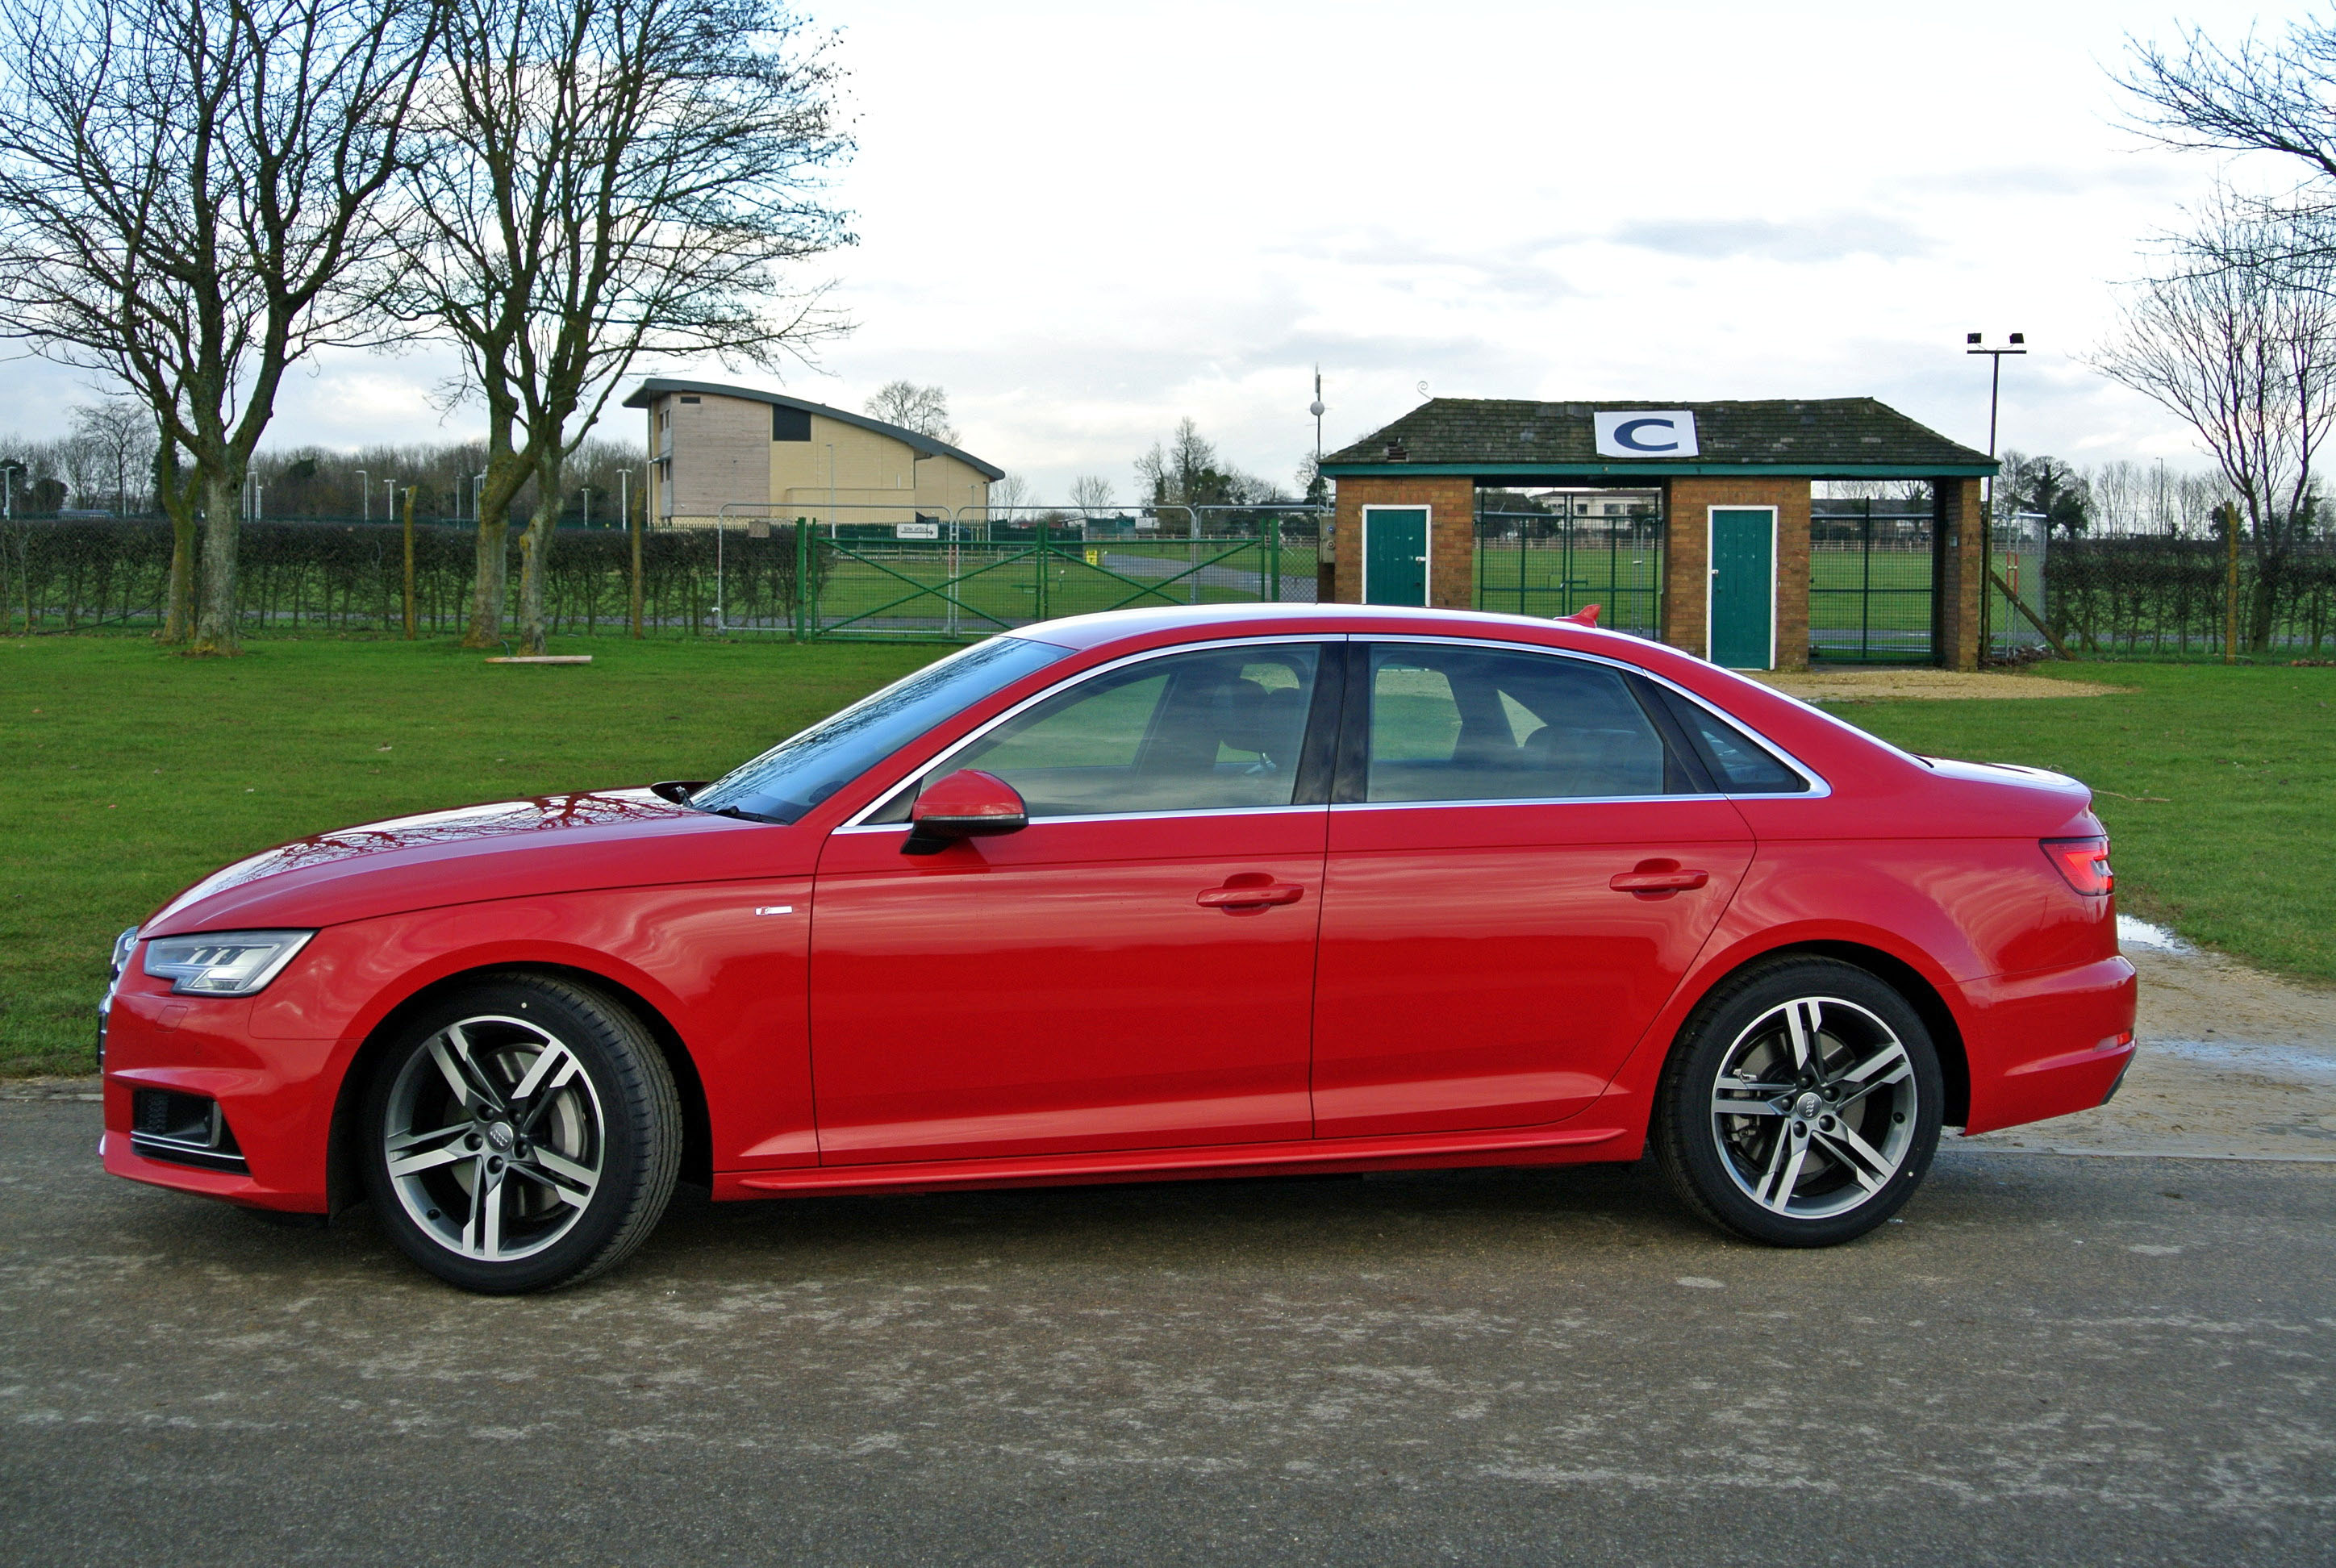 Is the Audi A4 merely overbearing, rather than popular premium?